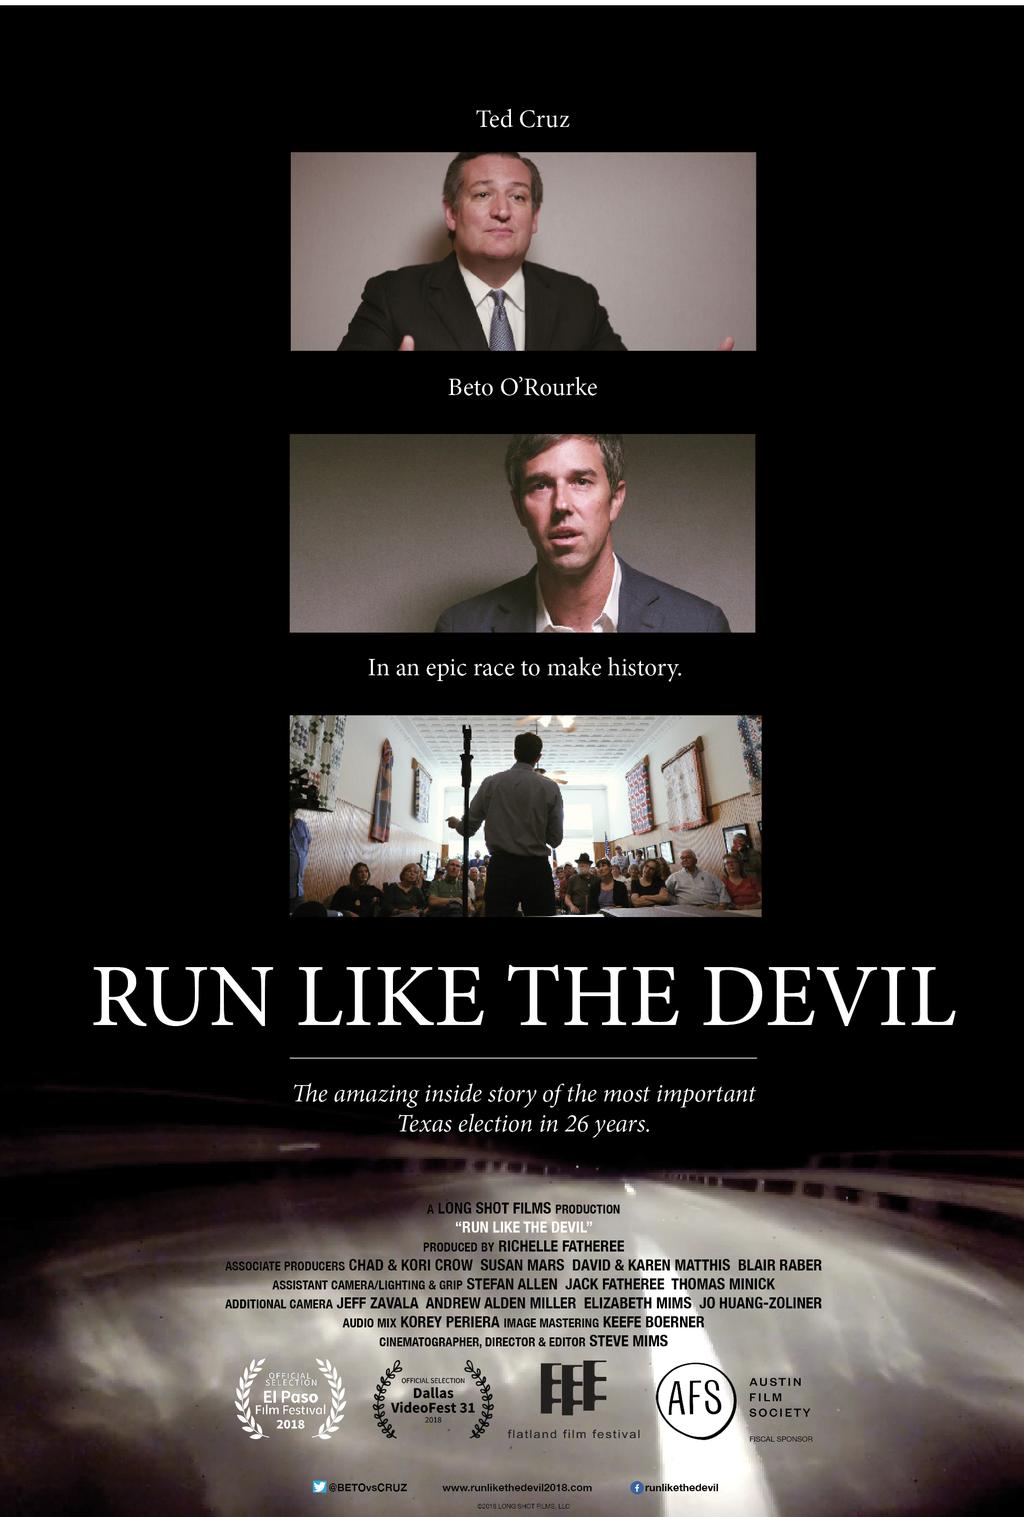 RUN LIKE THE DEVIL Press Kit press contacts: Richelle Fatheree (producer) 202.525.